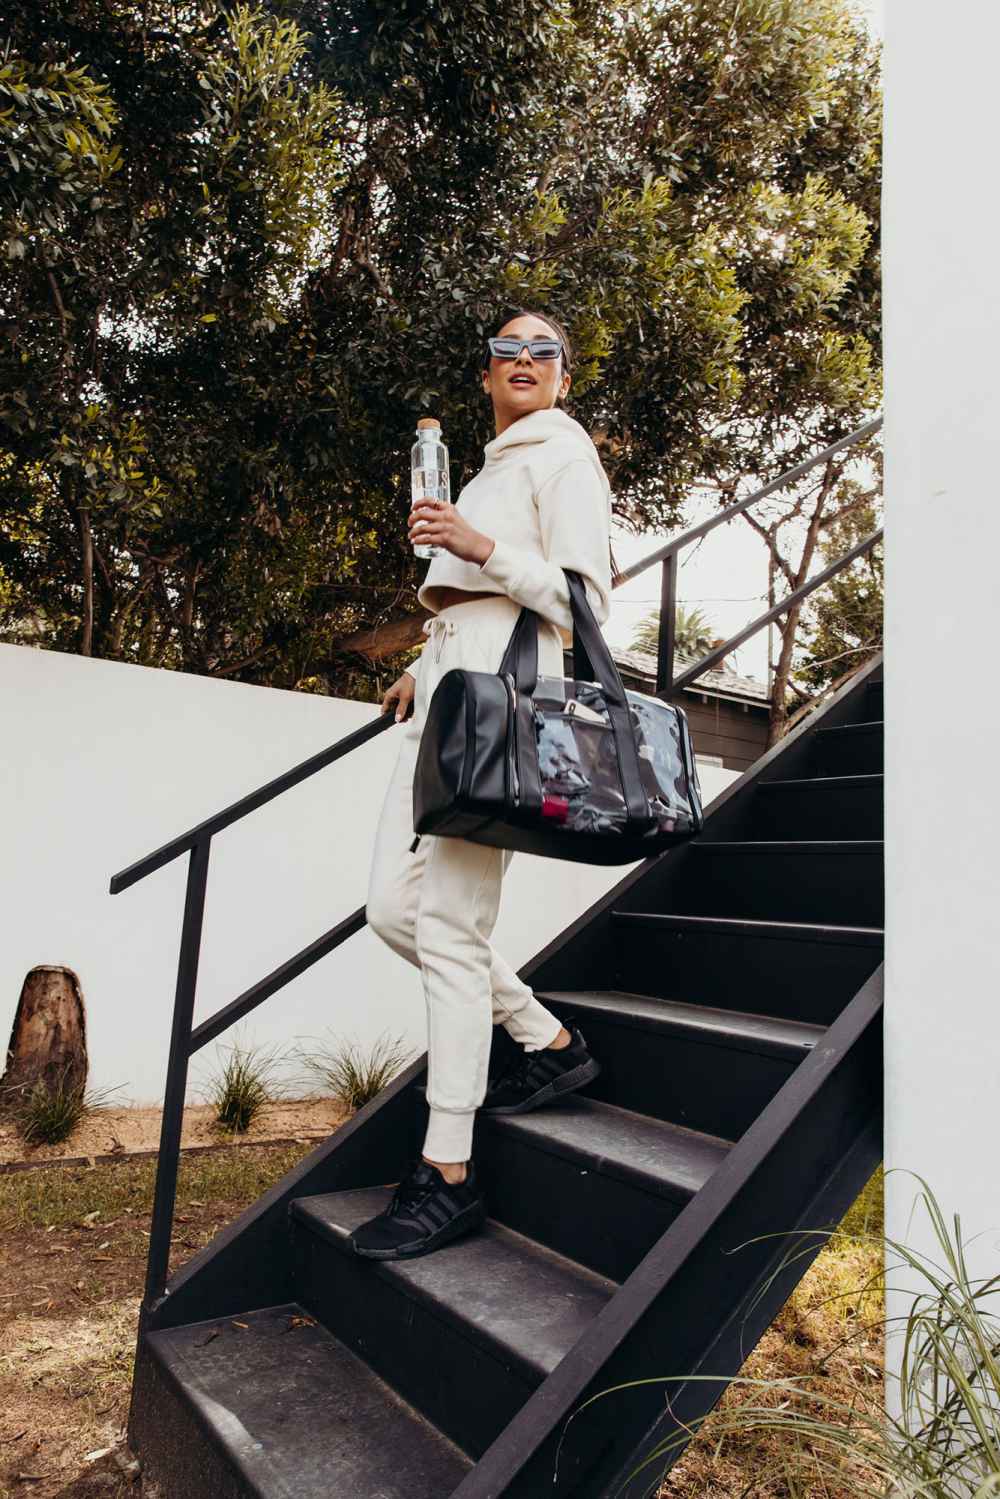 Shay Mitchell Is Here With the Smartest Festival Bag Collection